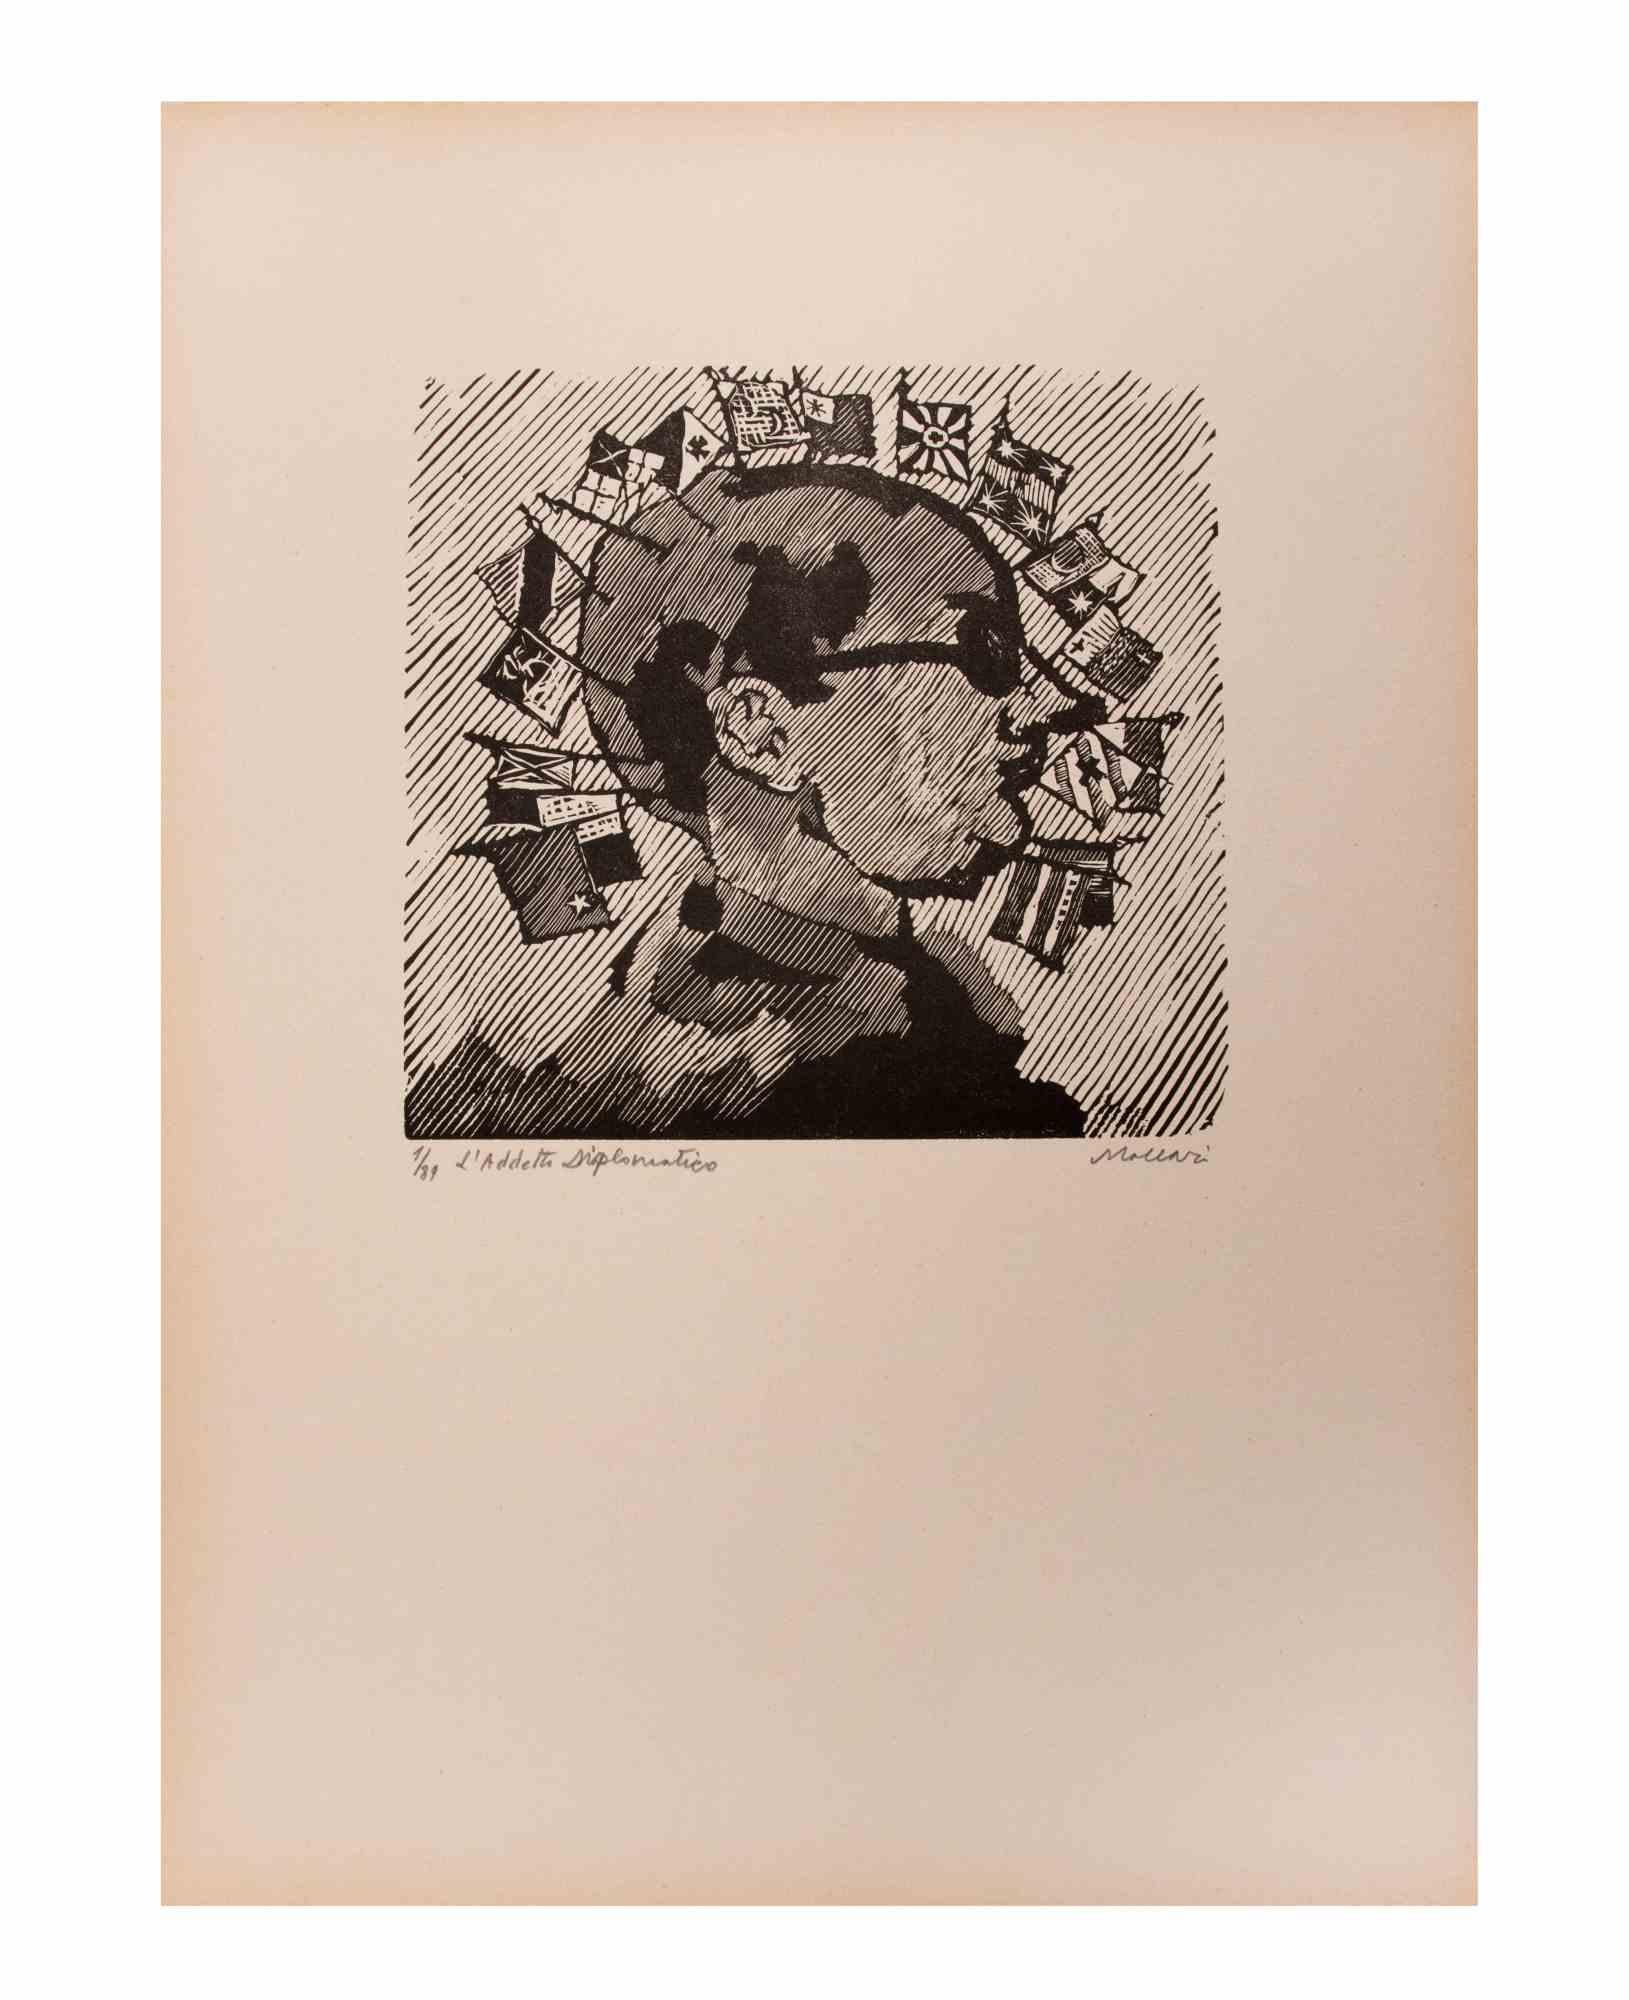 Diplomatic employees is an Artwork realized by Mino Maccari  (1924-1989) in the Mid-20th Century.

B./W. Woodcut on paper. Hand-signed on the lower, numbered 1/89 specimens and titled on the left margin.

Good conditions.

Mino Maccari (Siena,